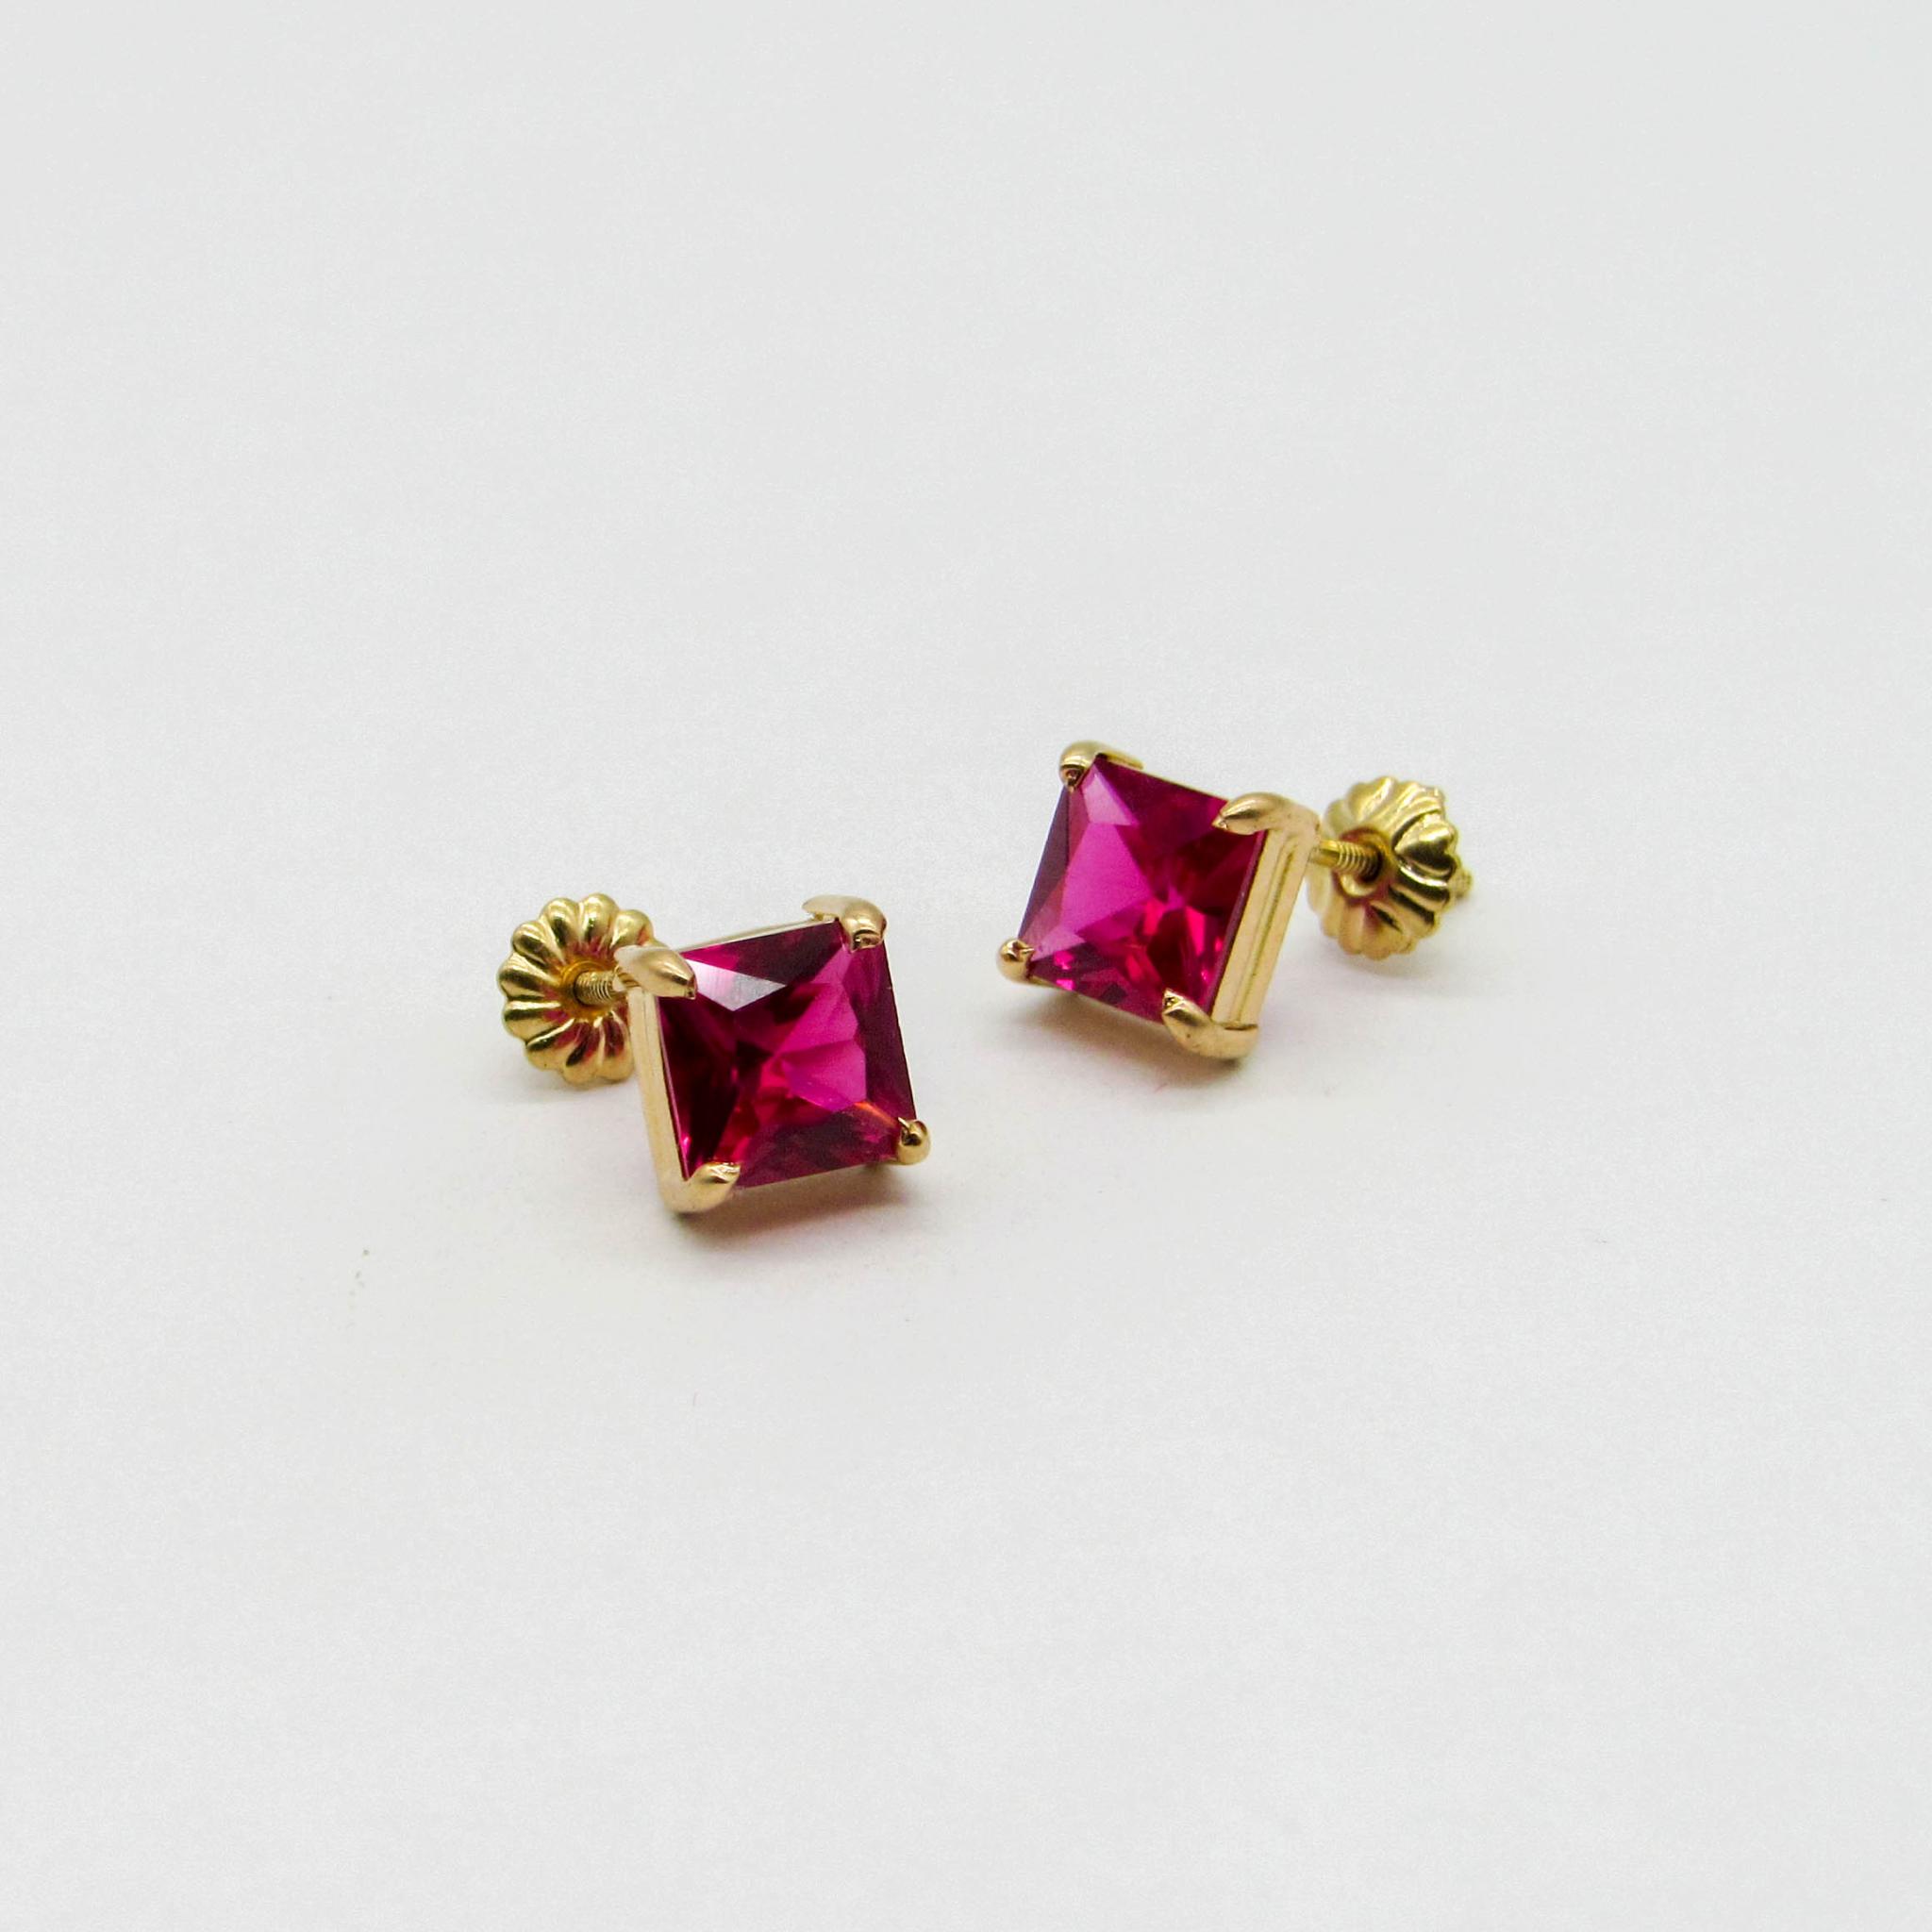 AROS CUBIC 6x6MM GRIFAS /O.ROJO